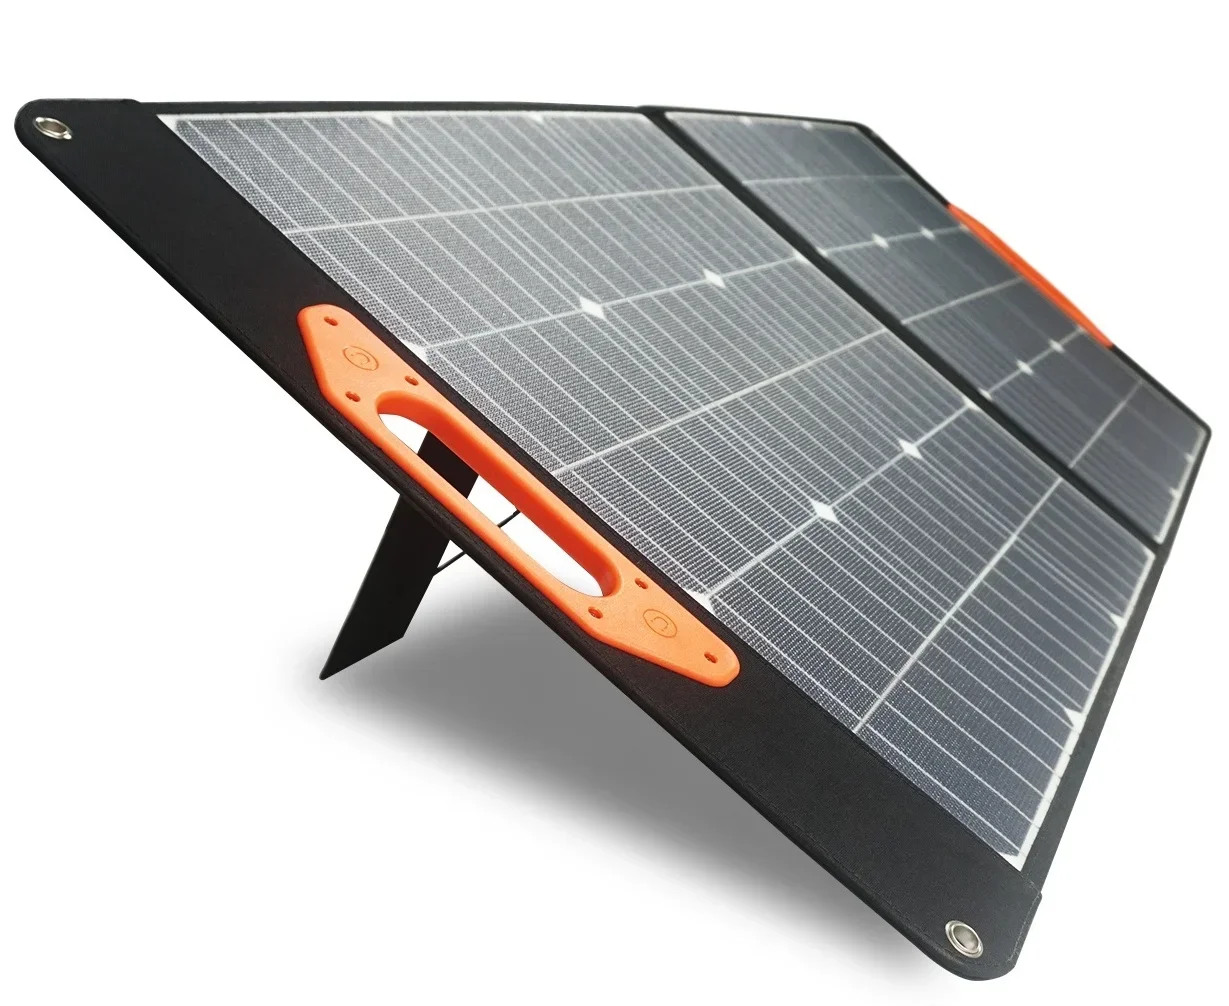 Flexible and foldable solar charger - Portable Solar Panel